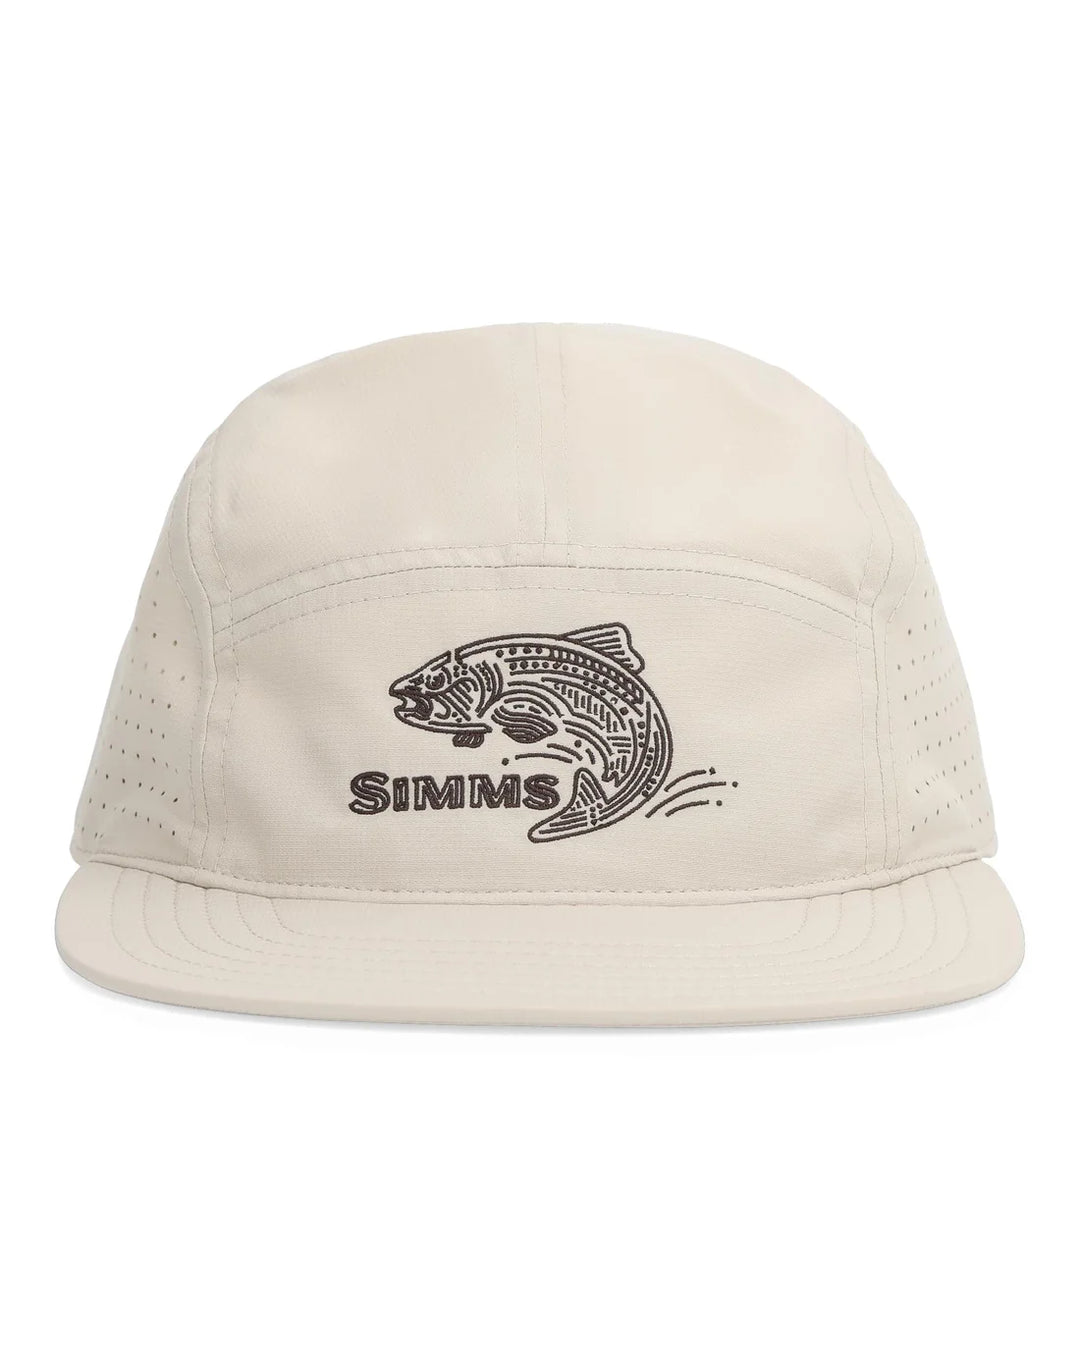 Simms - Hooked Trucker Cap – Fly Fish Food